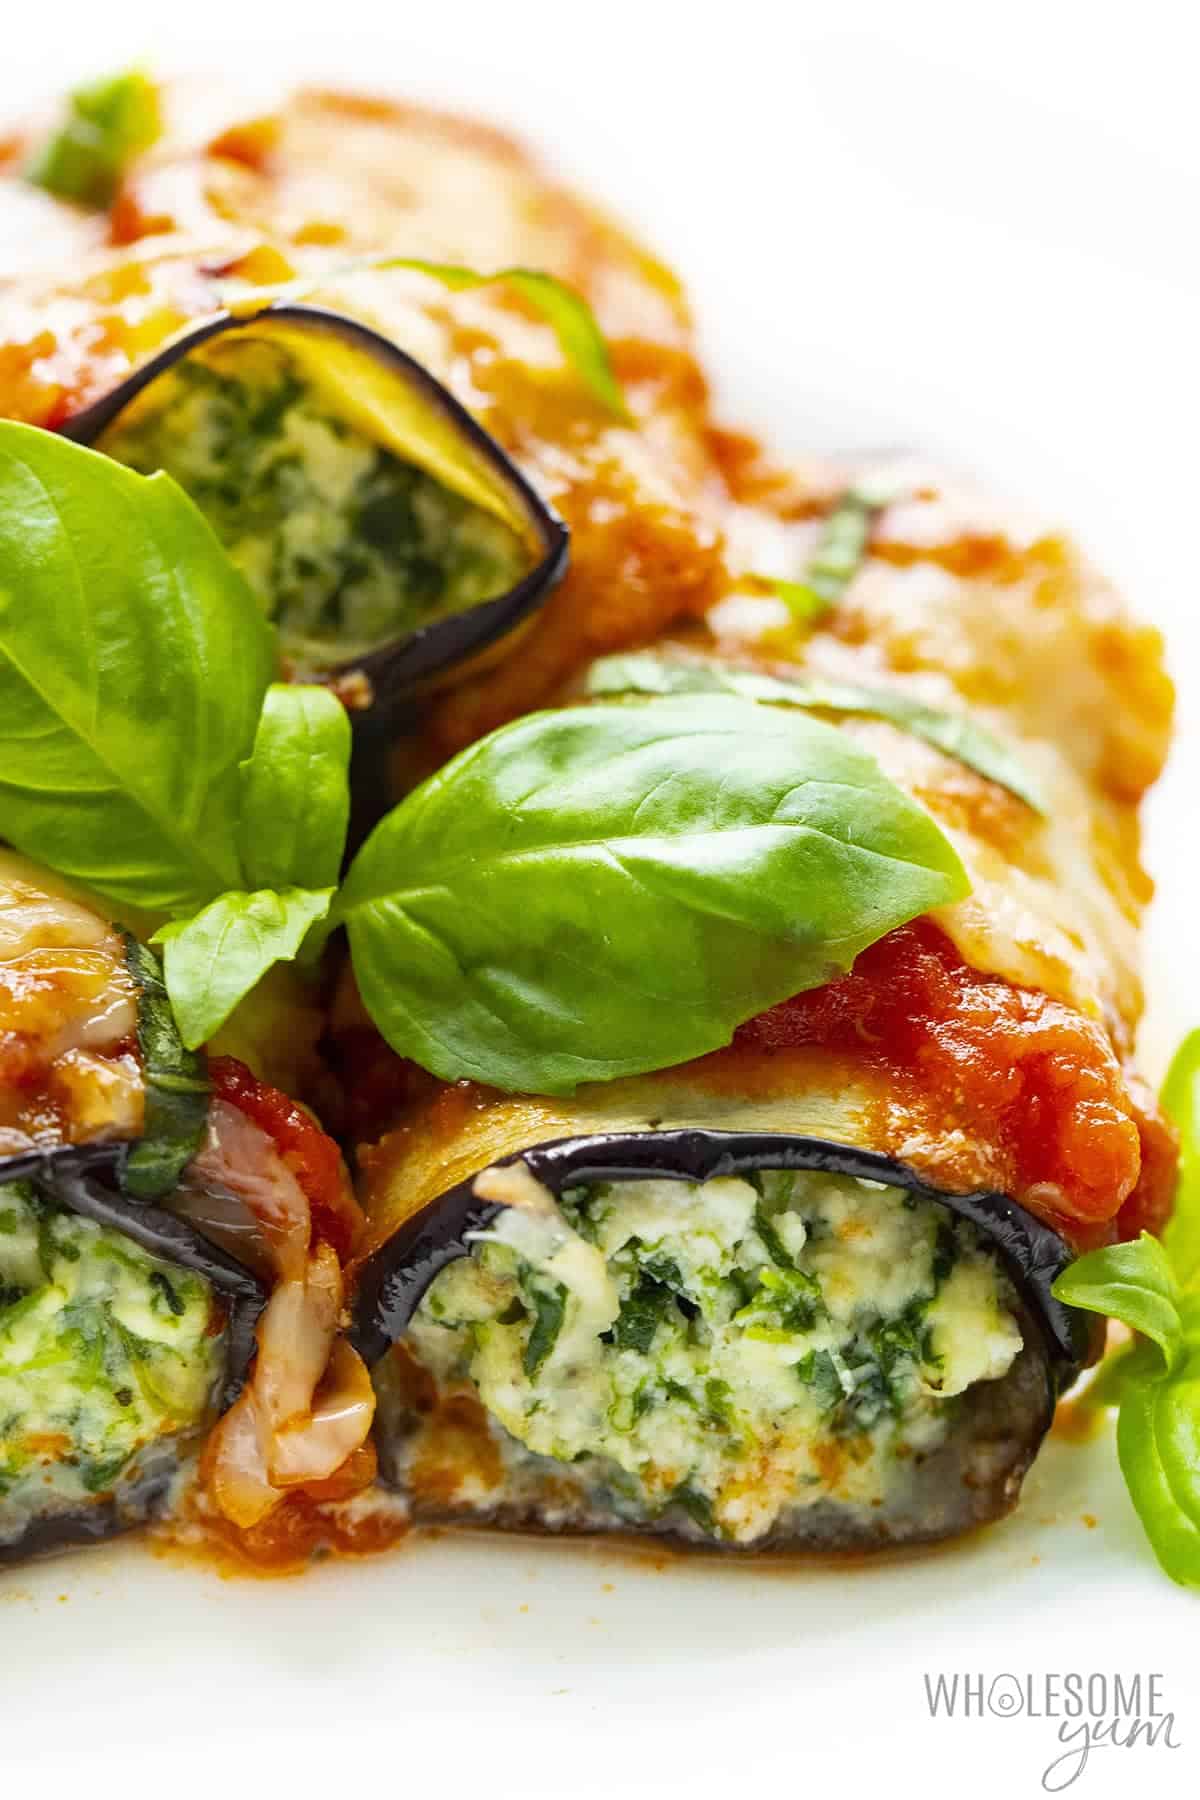 Eggplant rollatini recipe stacked together, with fresh basil.